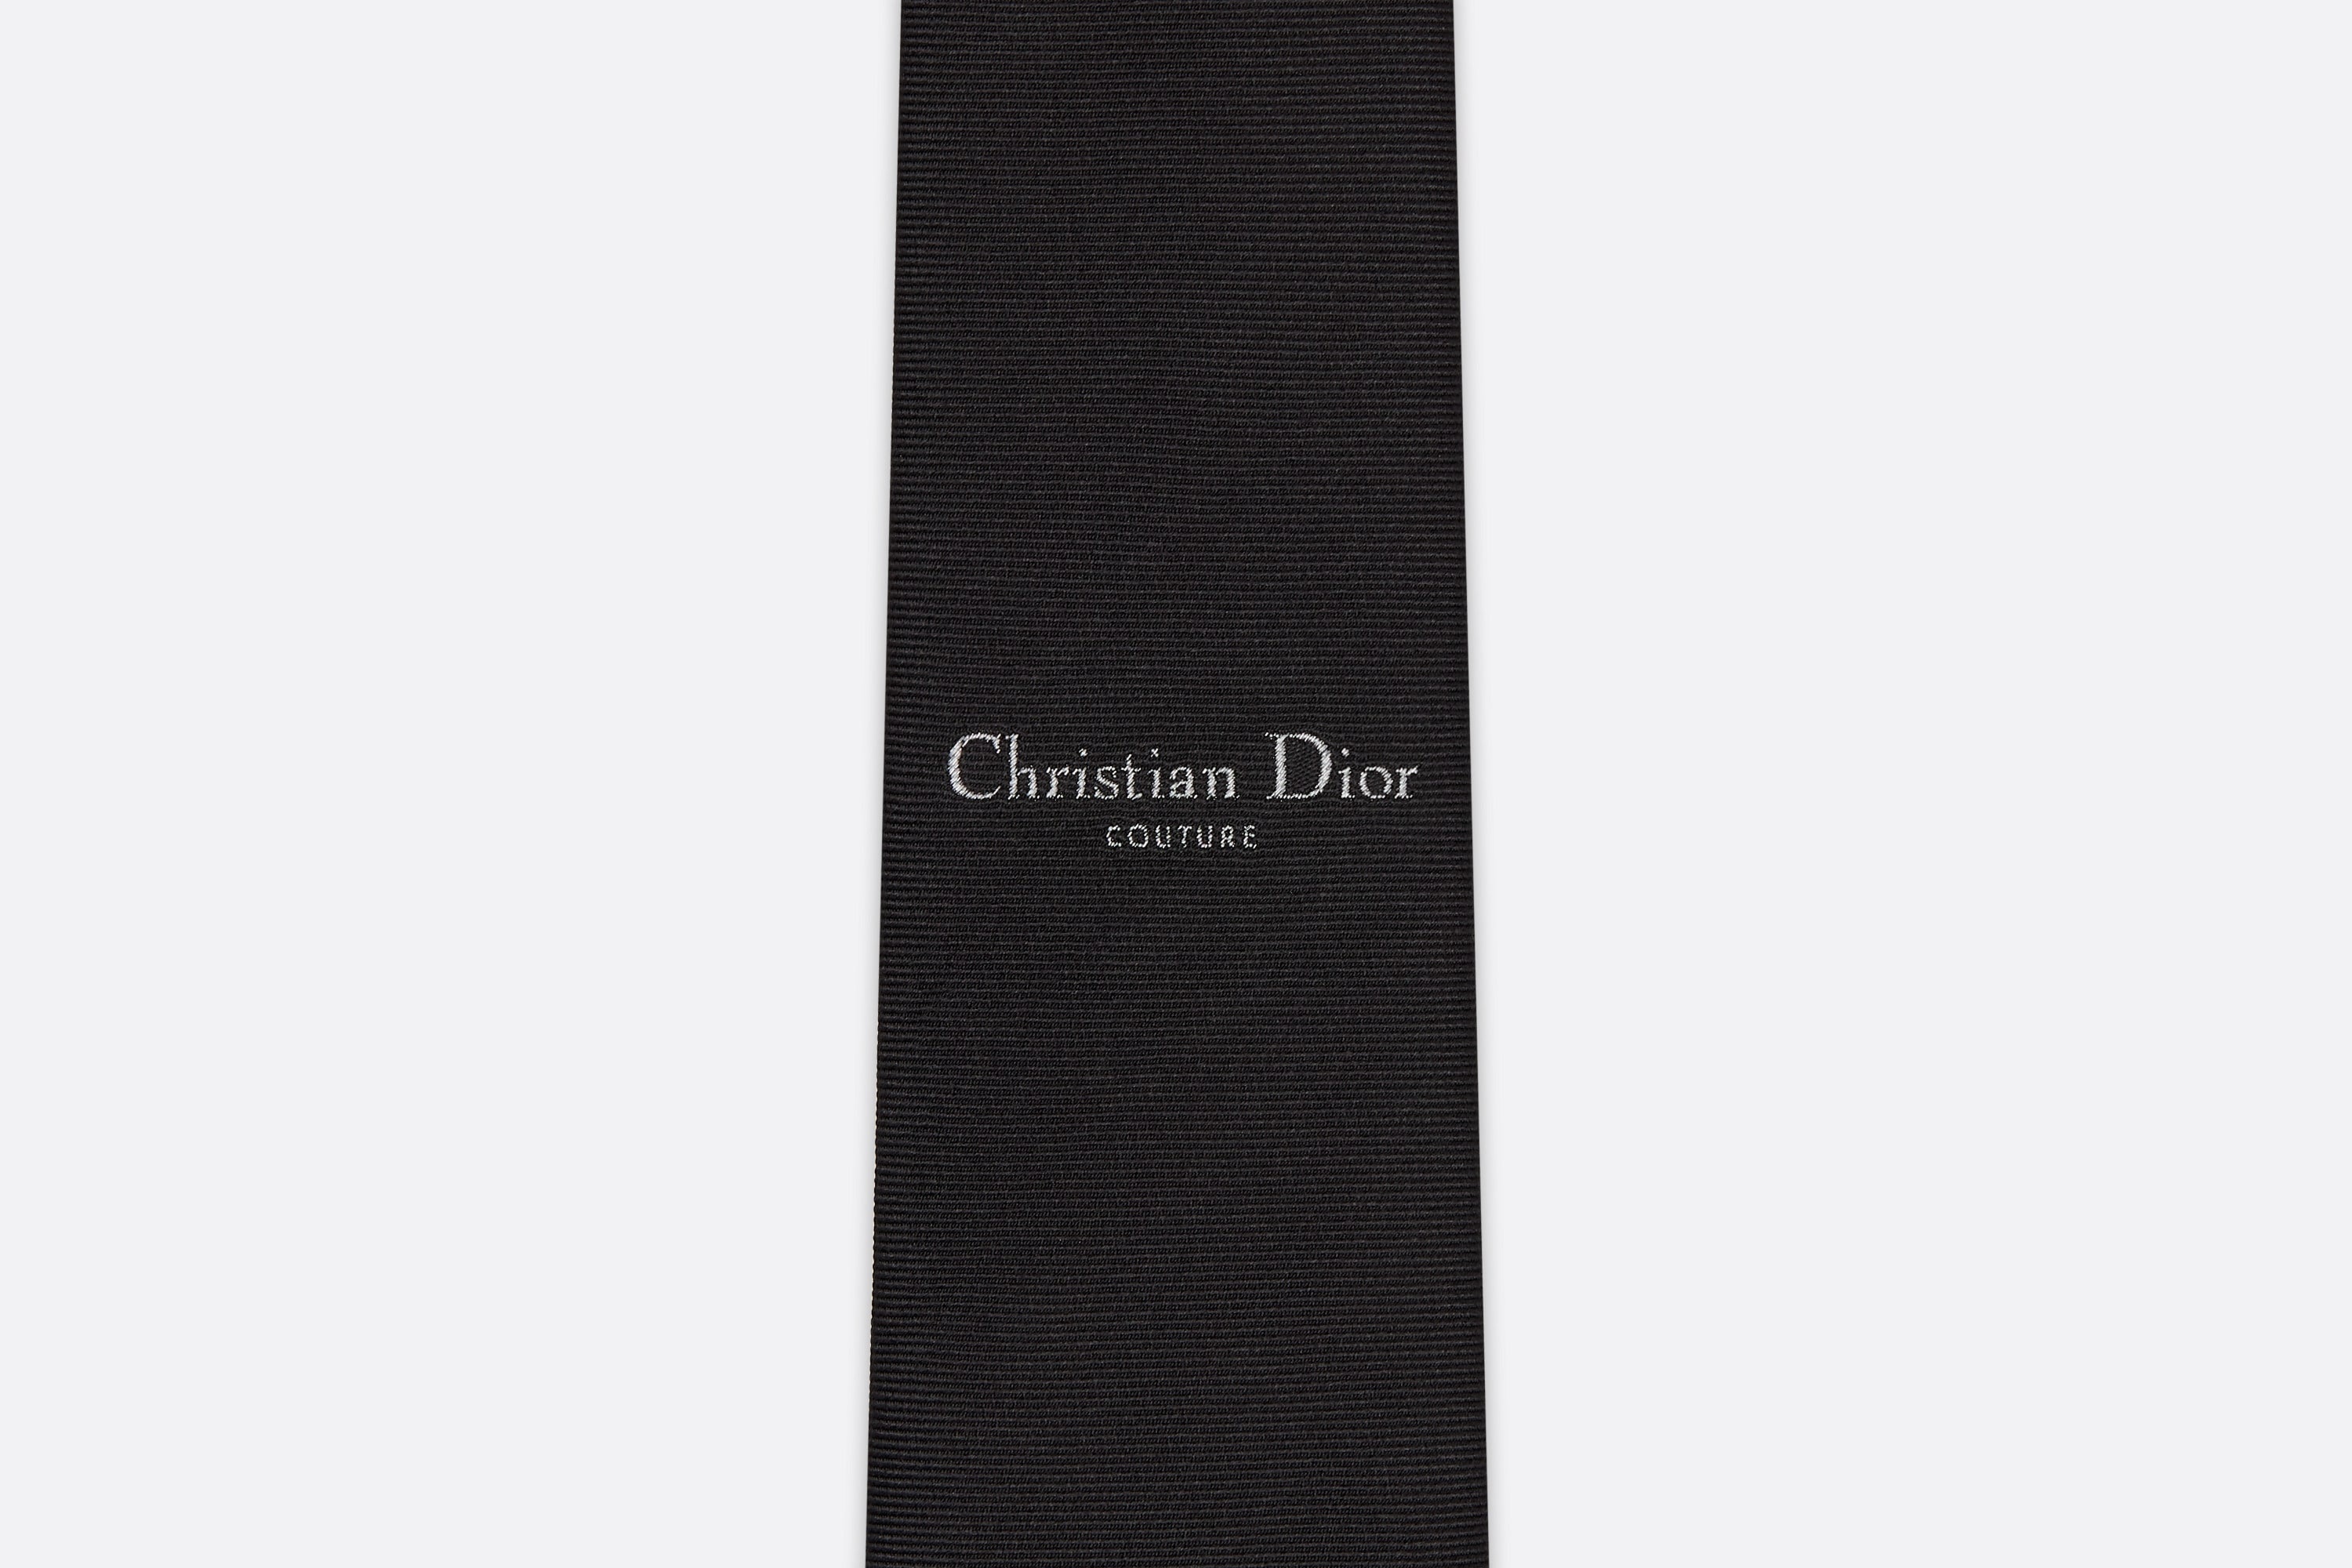 'Christian Dior COUTURE' Tie - 5